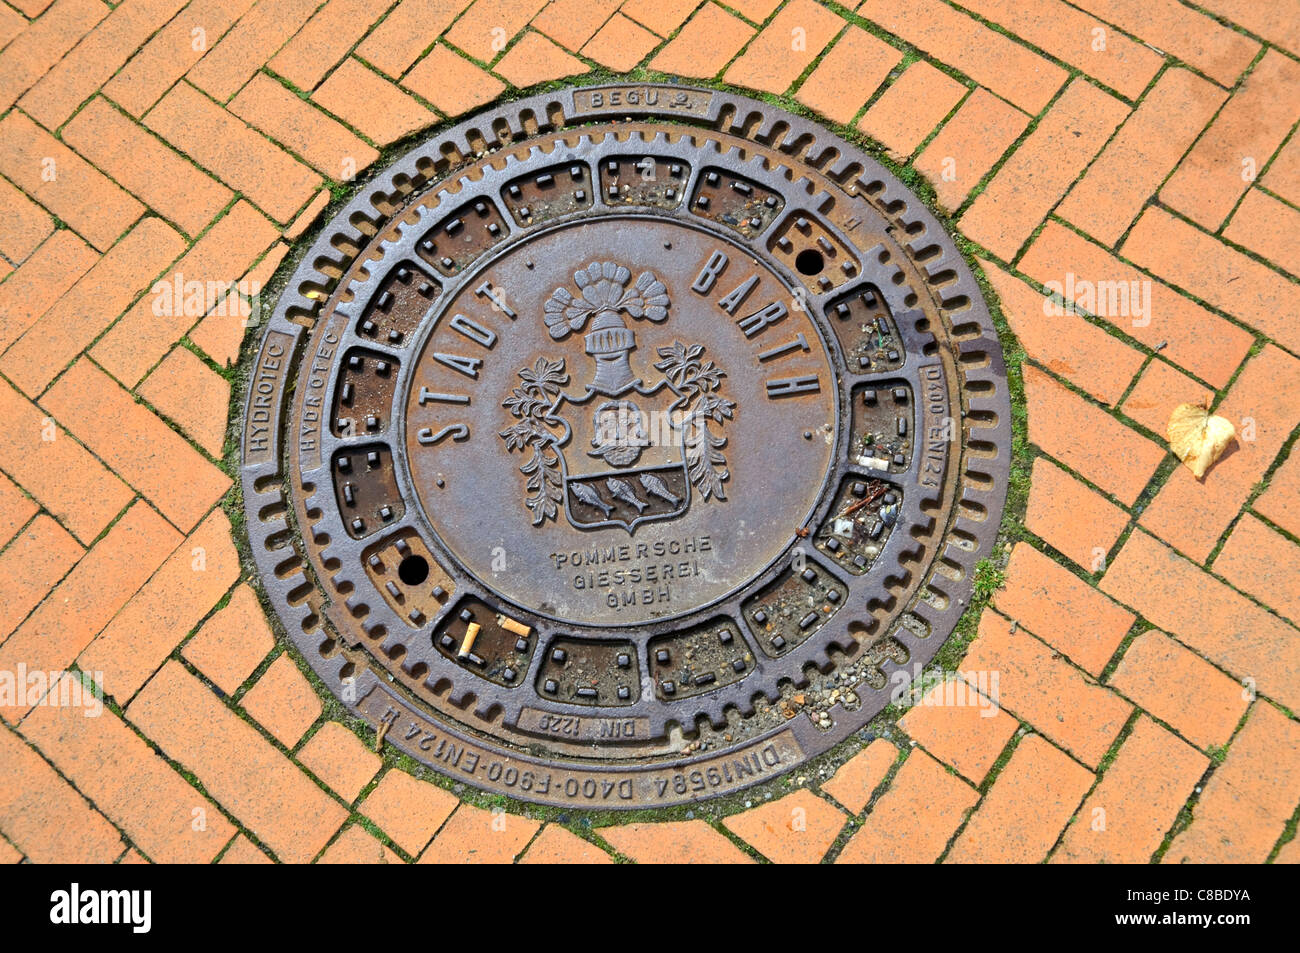 Man-hole cover in Barth, Mecklenburg-Vorpommern, Germany. Stock Photo